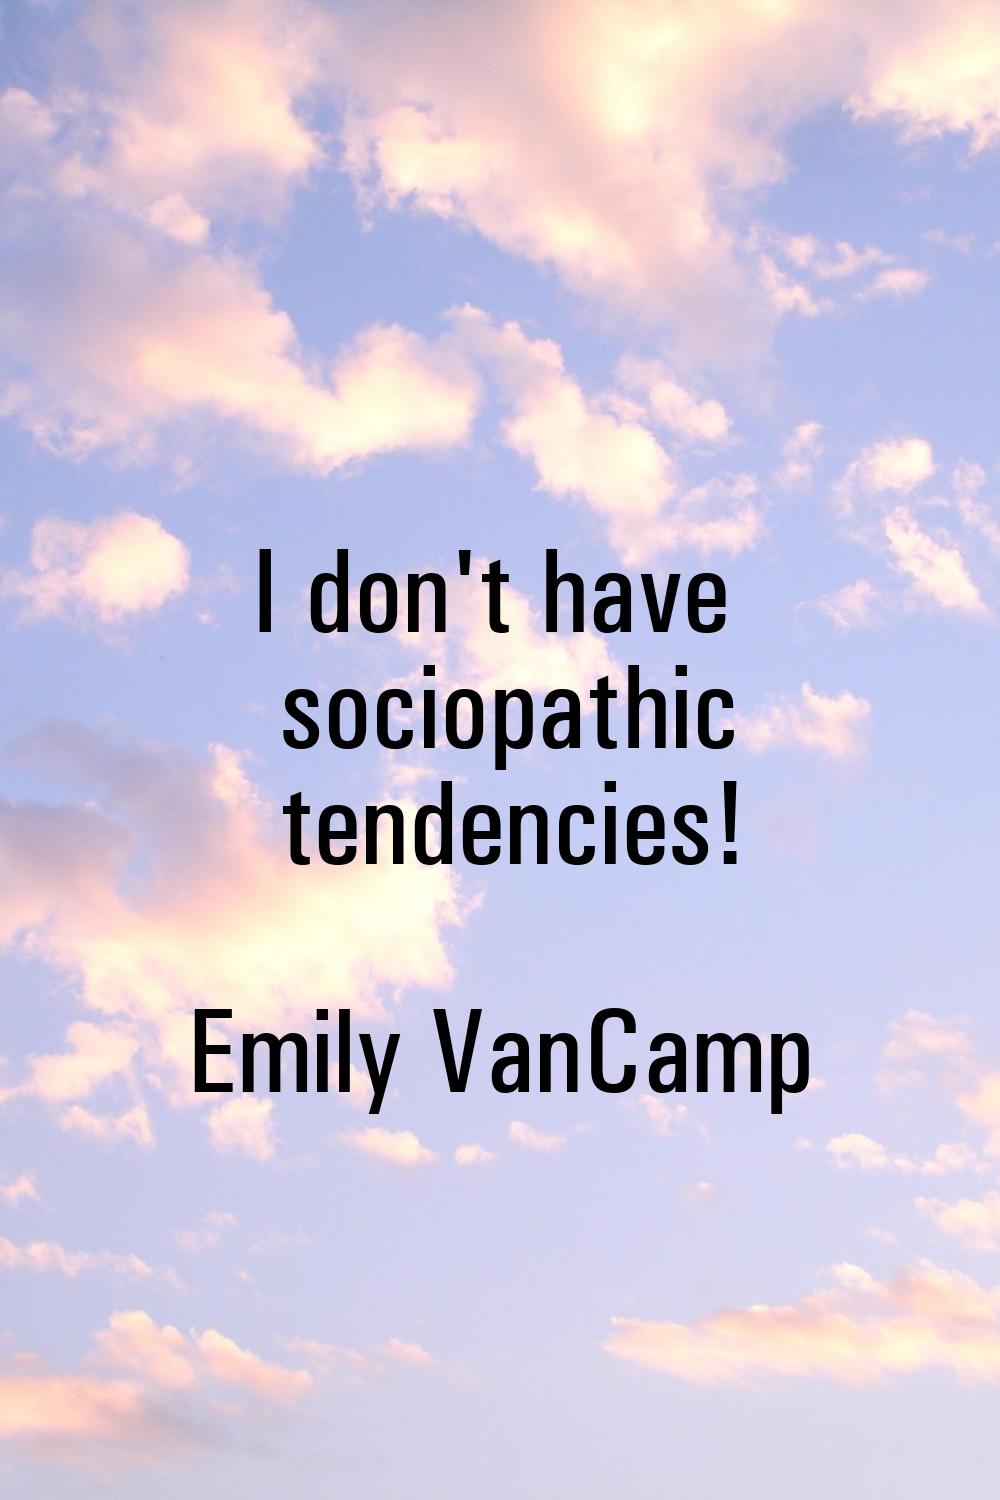 I don't have sociopathic tendencies!